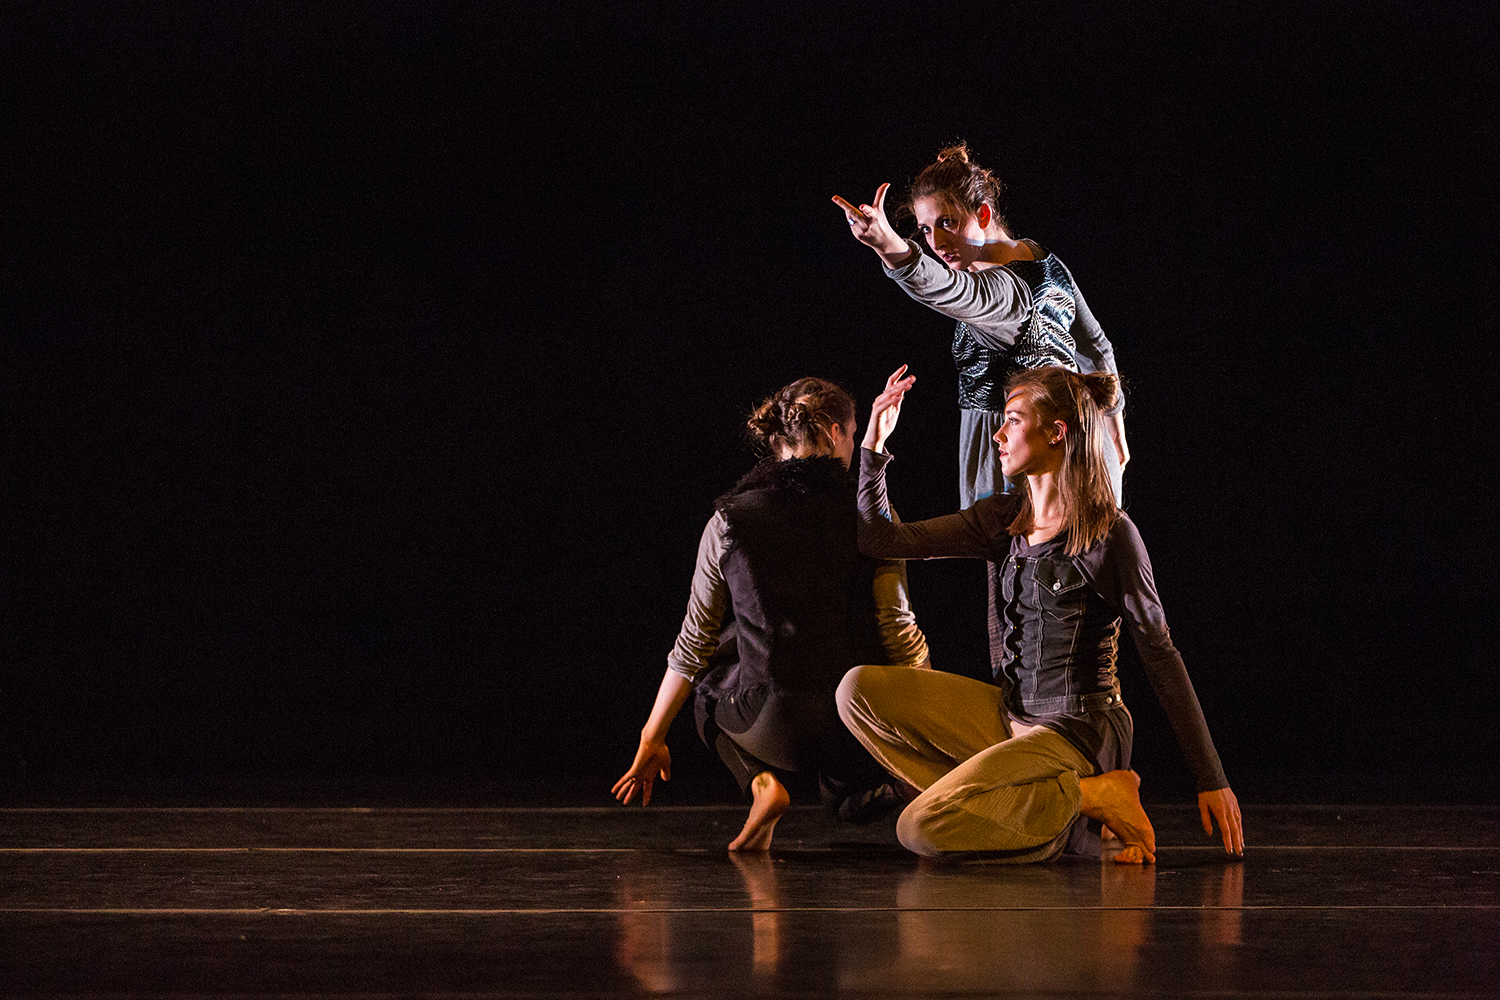  Undergraduate and Graduate students in the University of Iowa College of Dance perform in the Faculty/Graduate Concert dance performance at Space Place Theater on Wednesday, Feb. 7, 2018. 